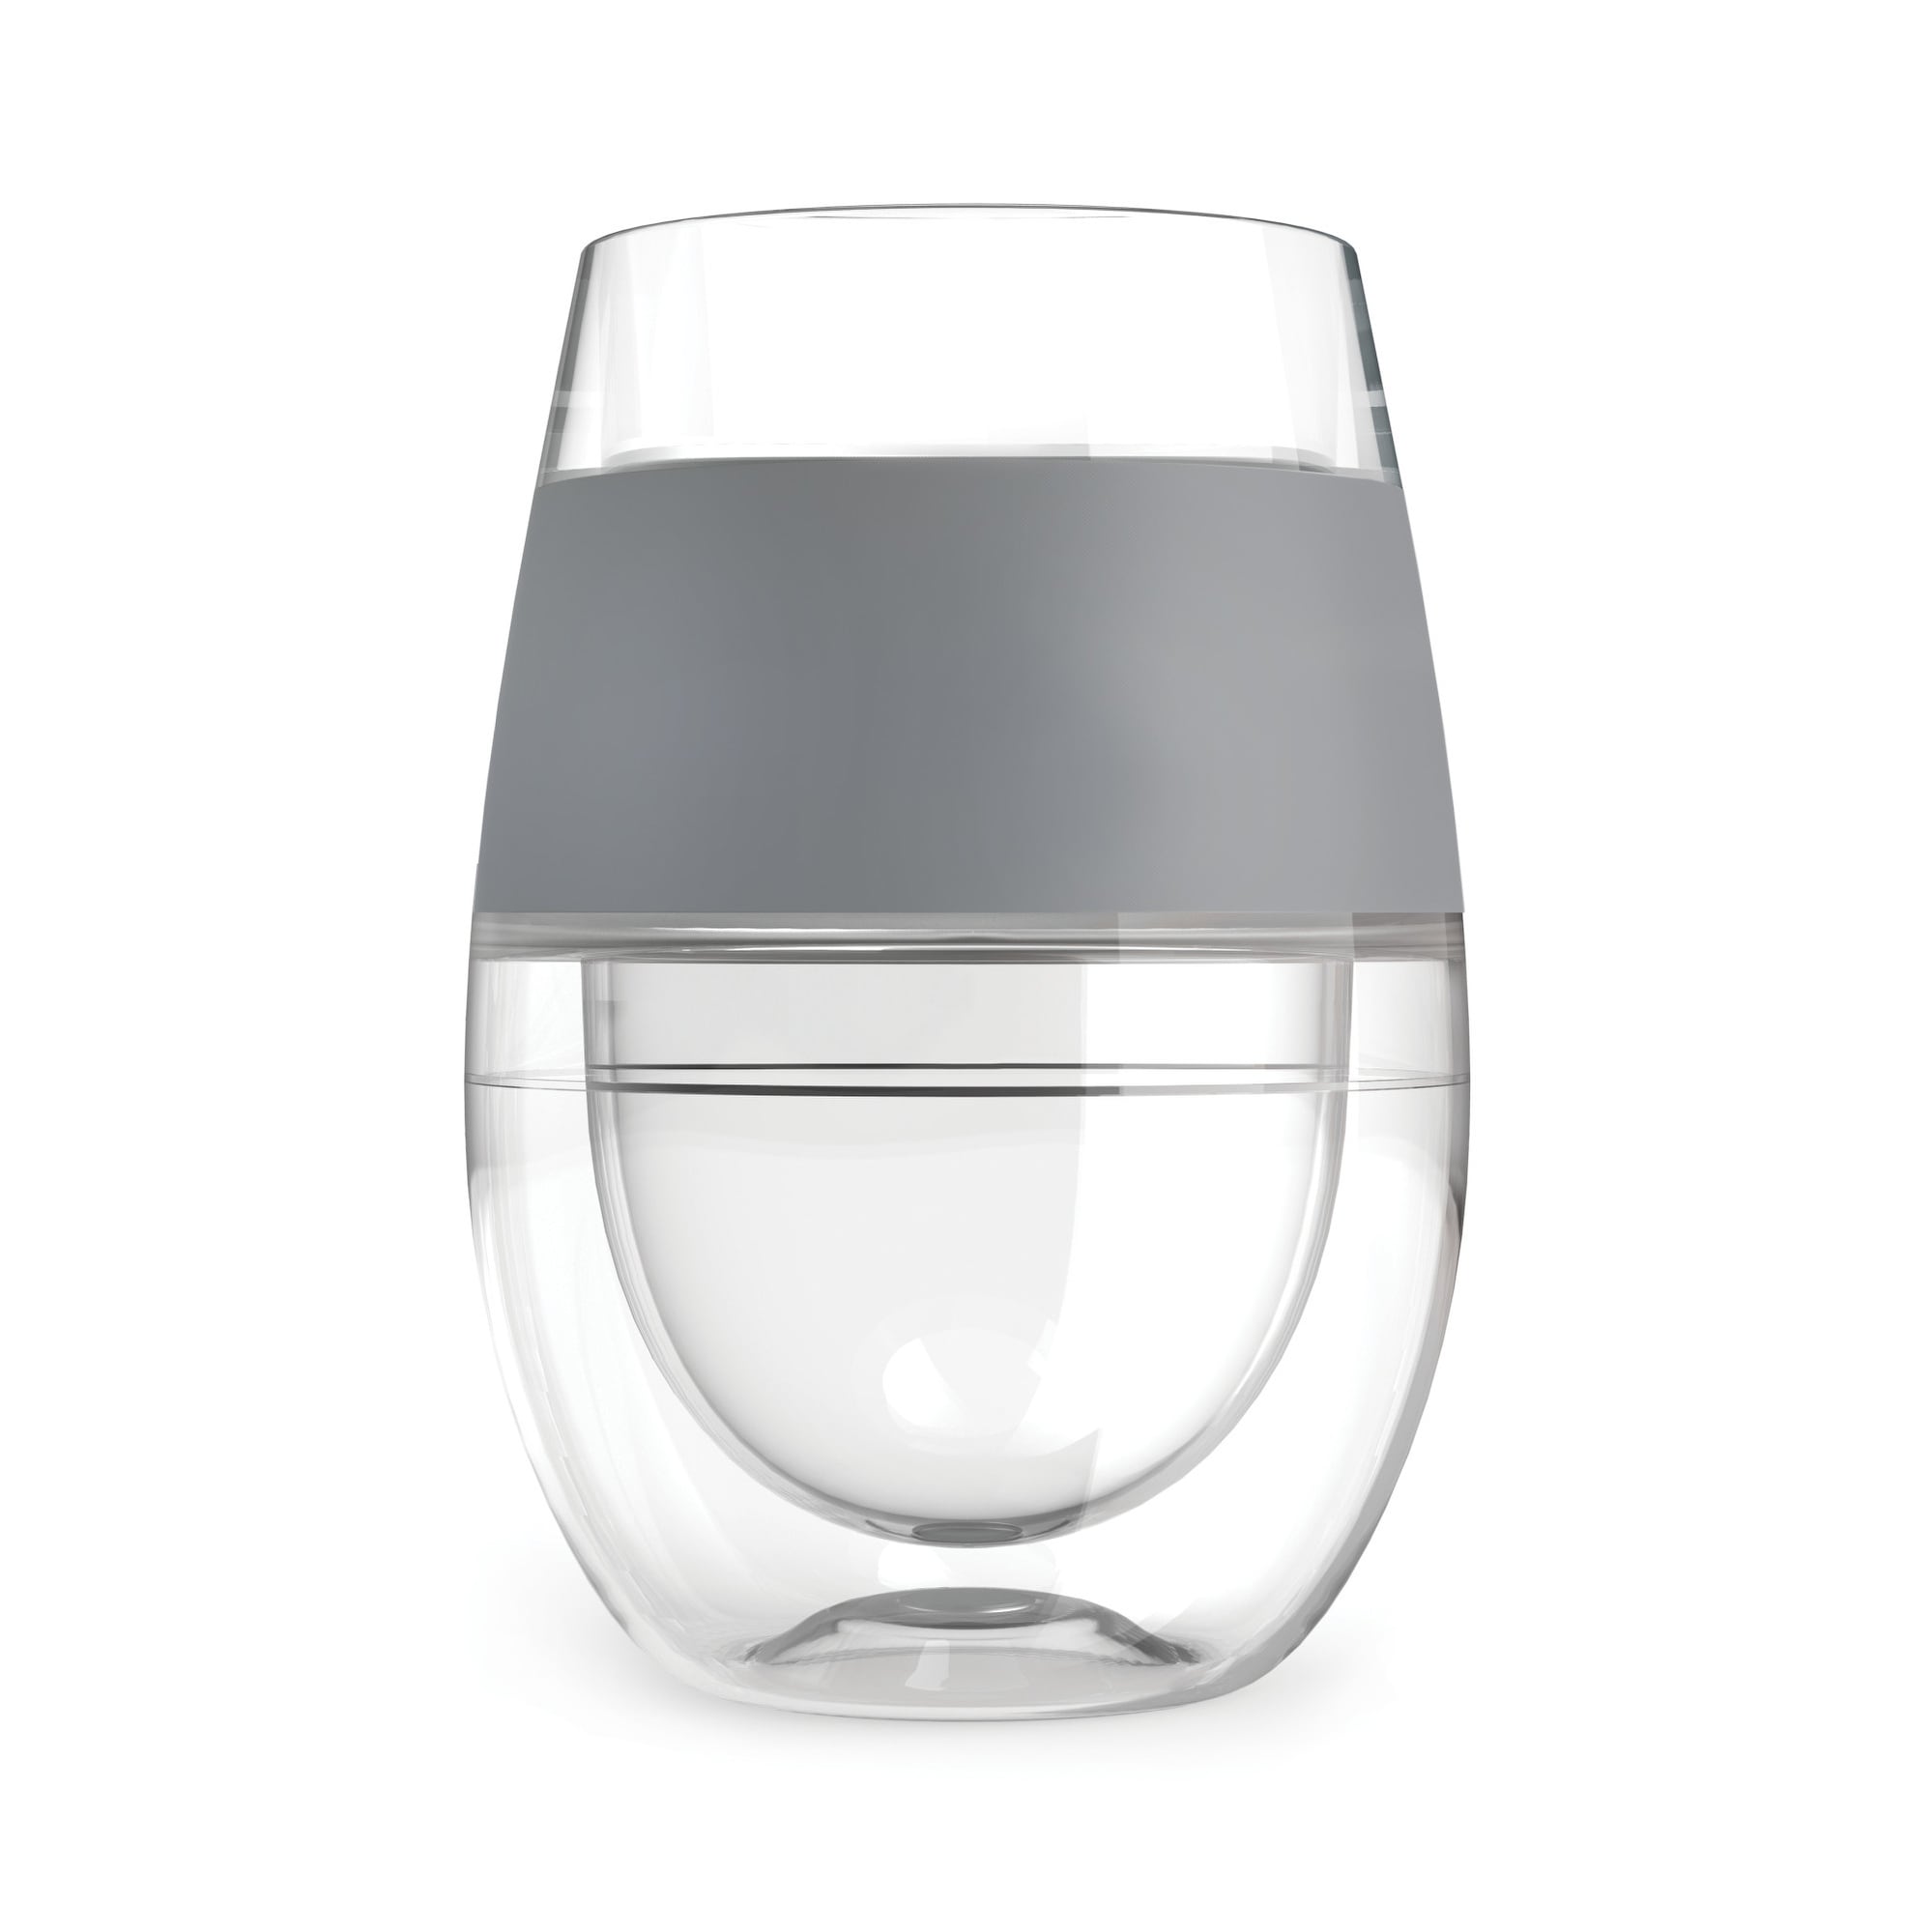 https://ak1.ostkcdn.com/images/products/is/images/direct/b82d5fcc3550f9406a1a7e25648a1d0f5814b2b9/Wine-FREEZE-Cooling-Cup-in-Grey-%281-pack%29-by-HOST.jpg